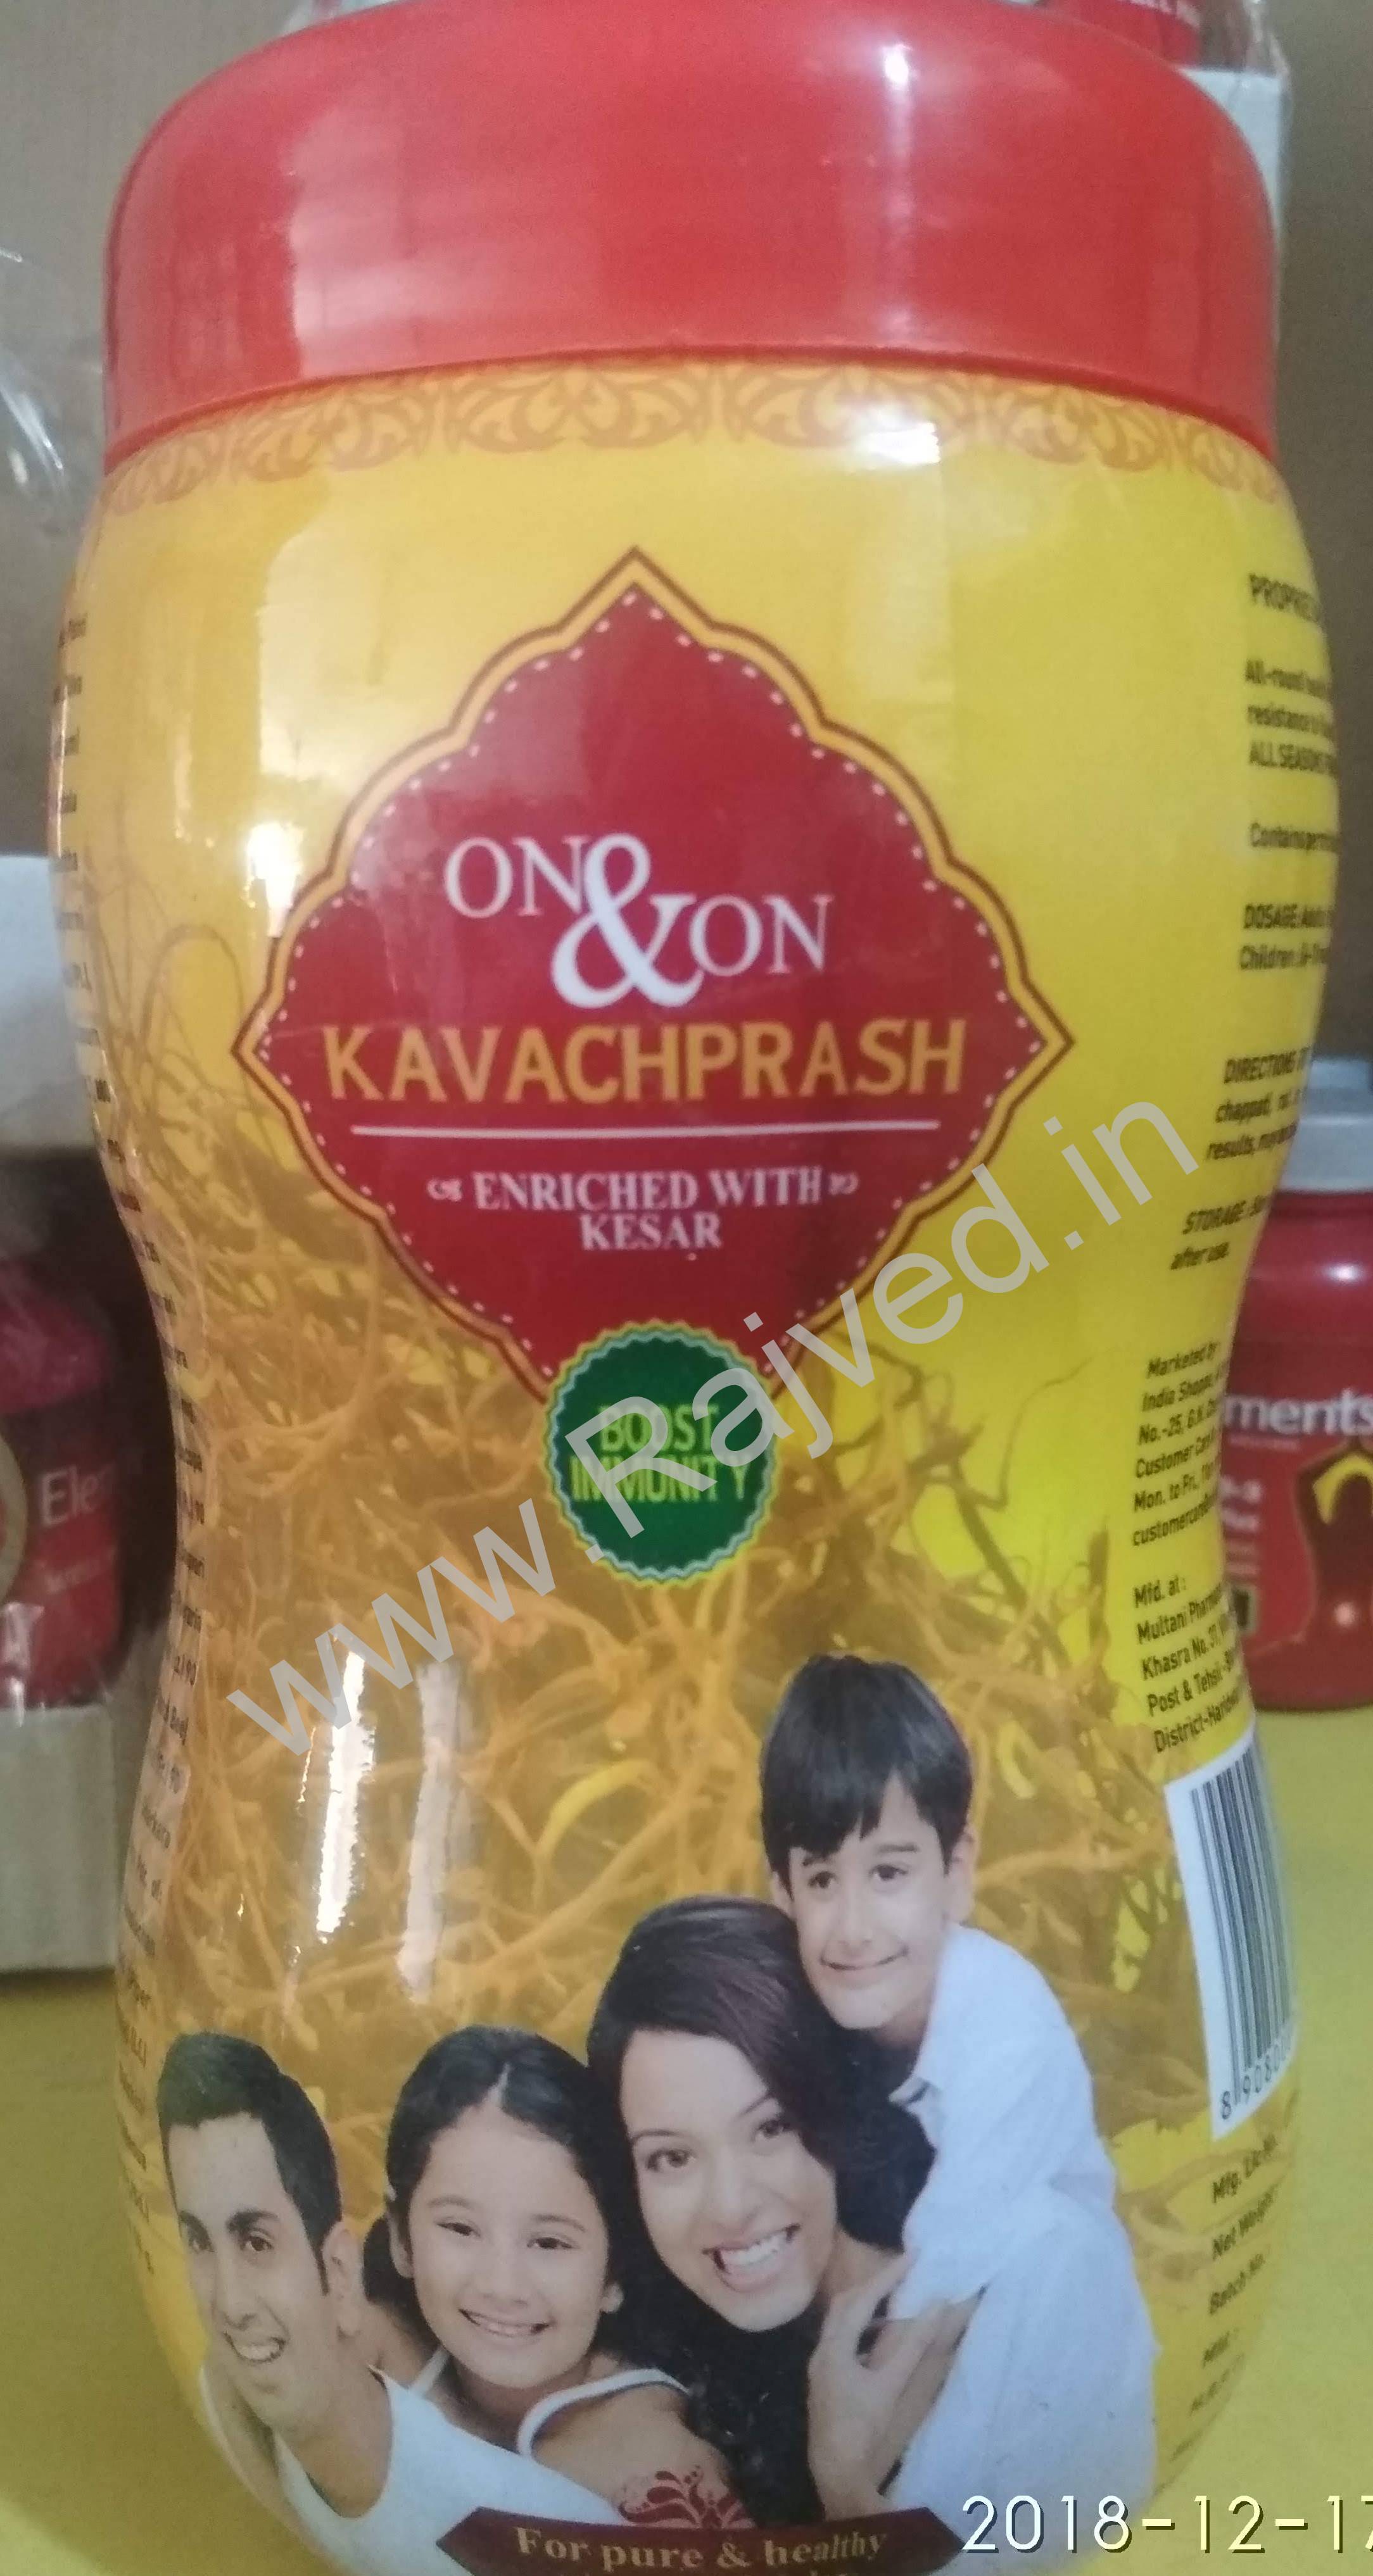 on and on kavachprash upto 15% off 1kg elements